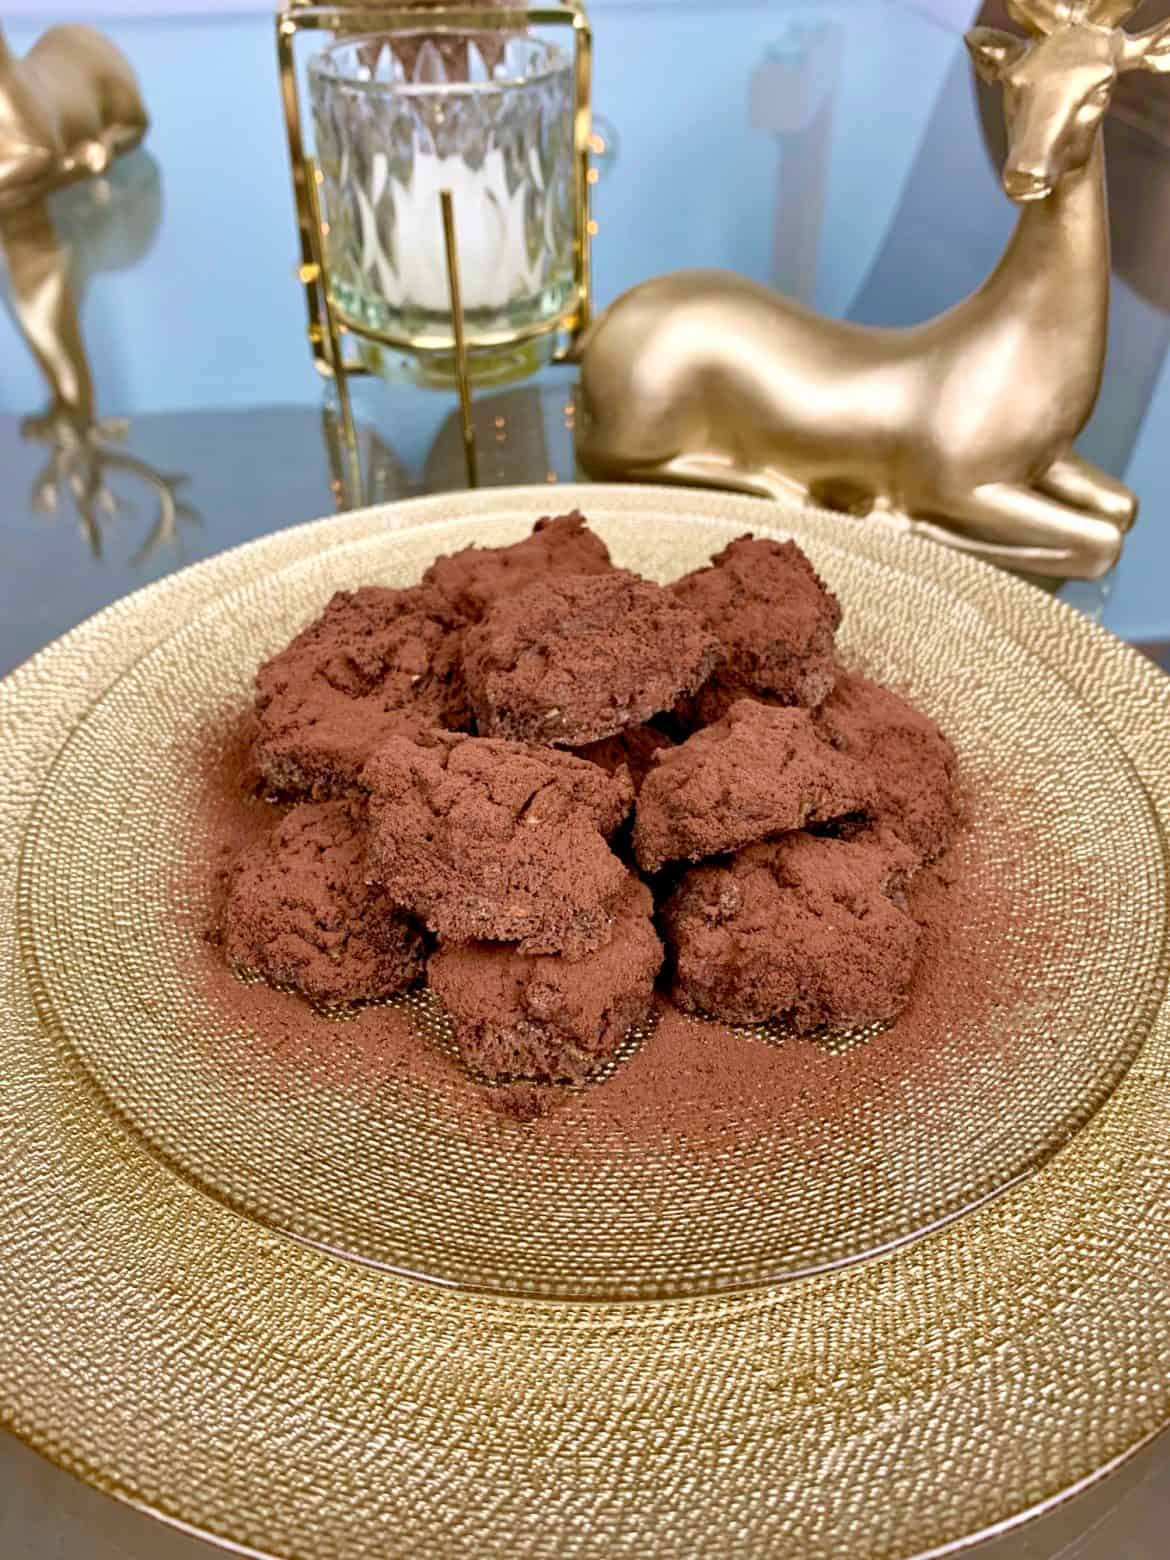 Kourabiedes with cocoa